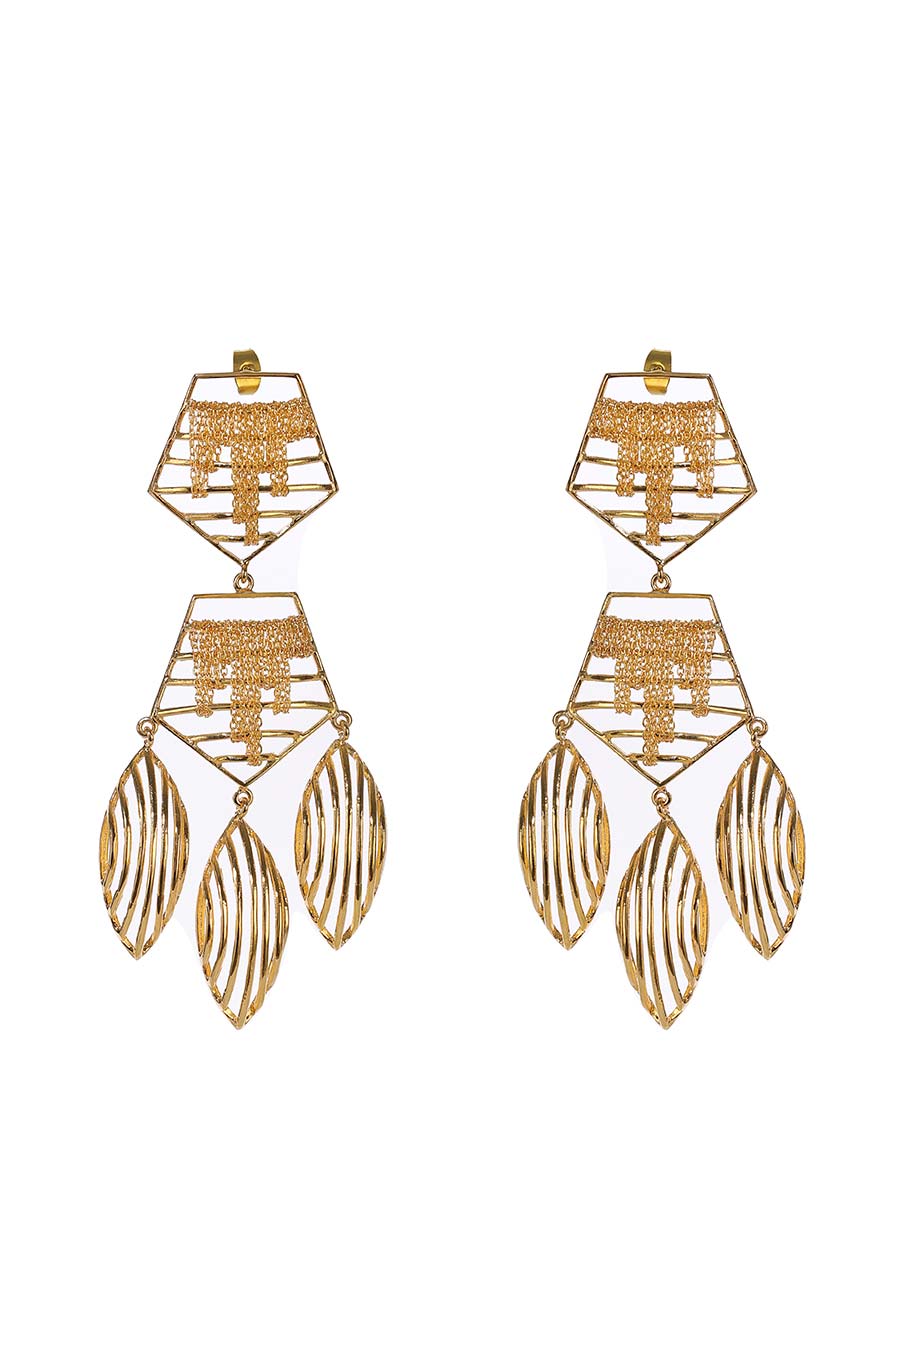 Pentagon Shaped Gold Plated Earrings